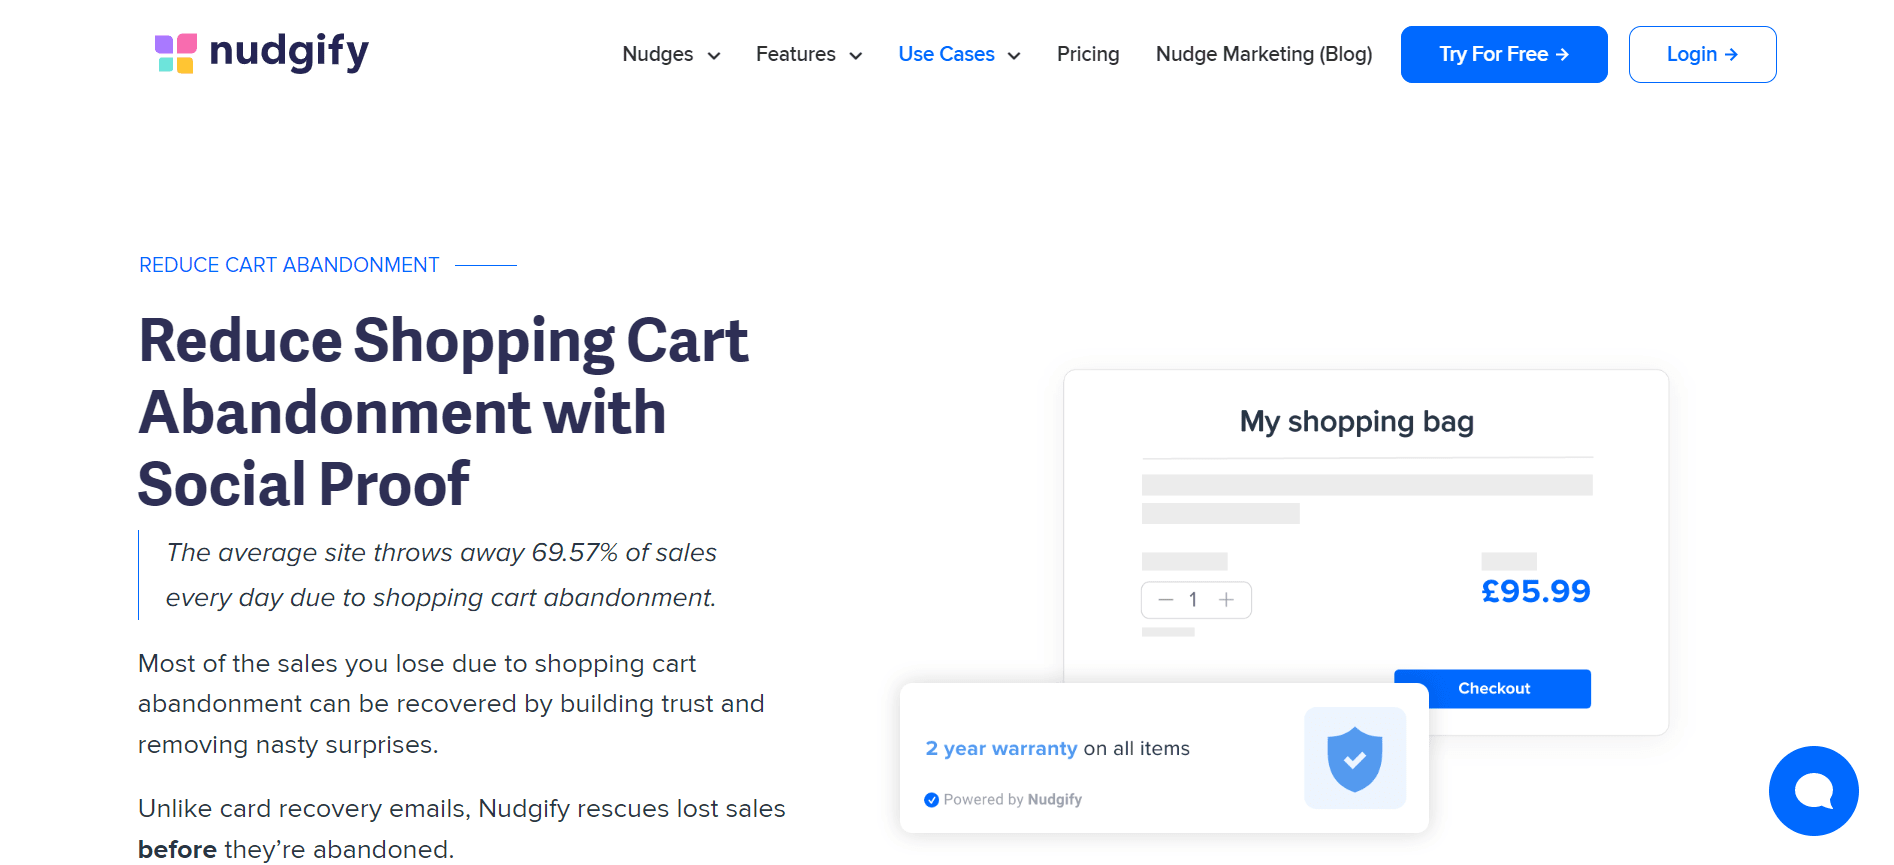 Reduce Cart Abandonment: nudgify review